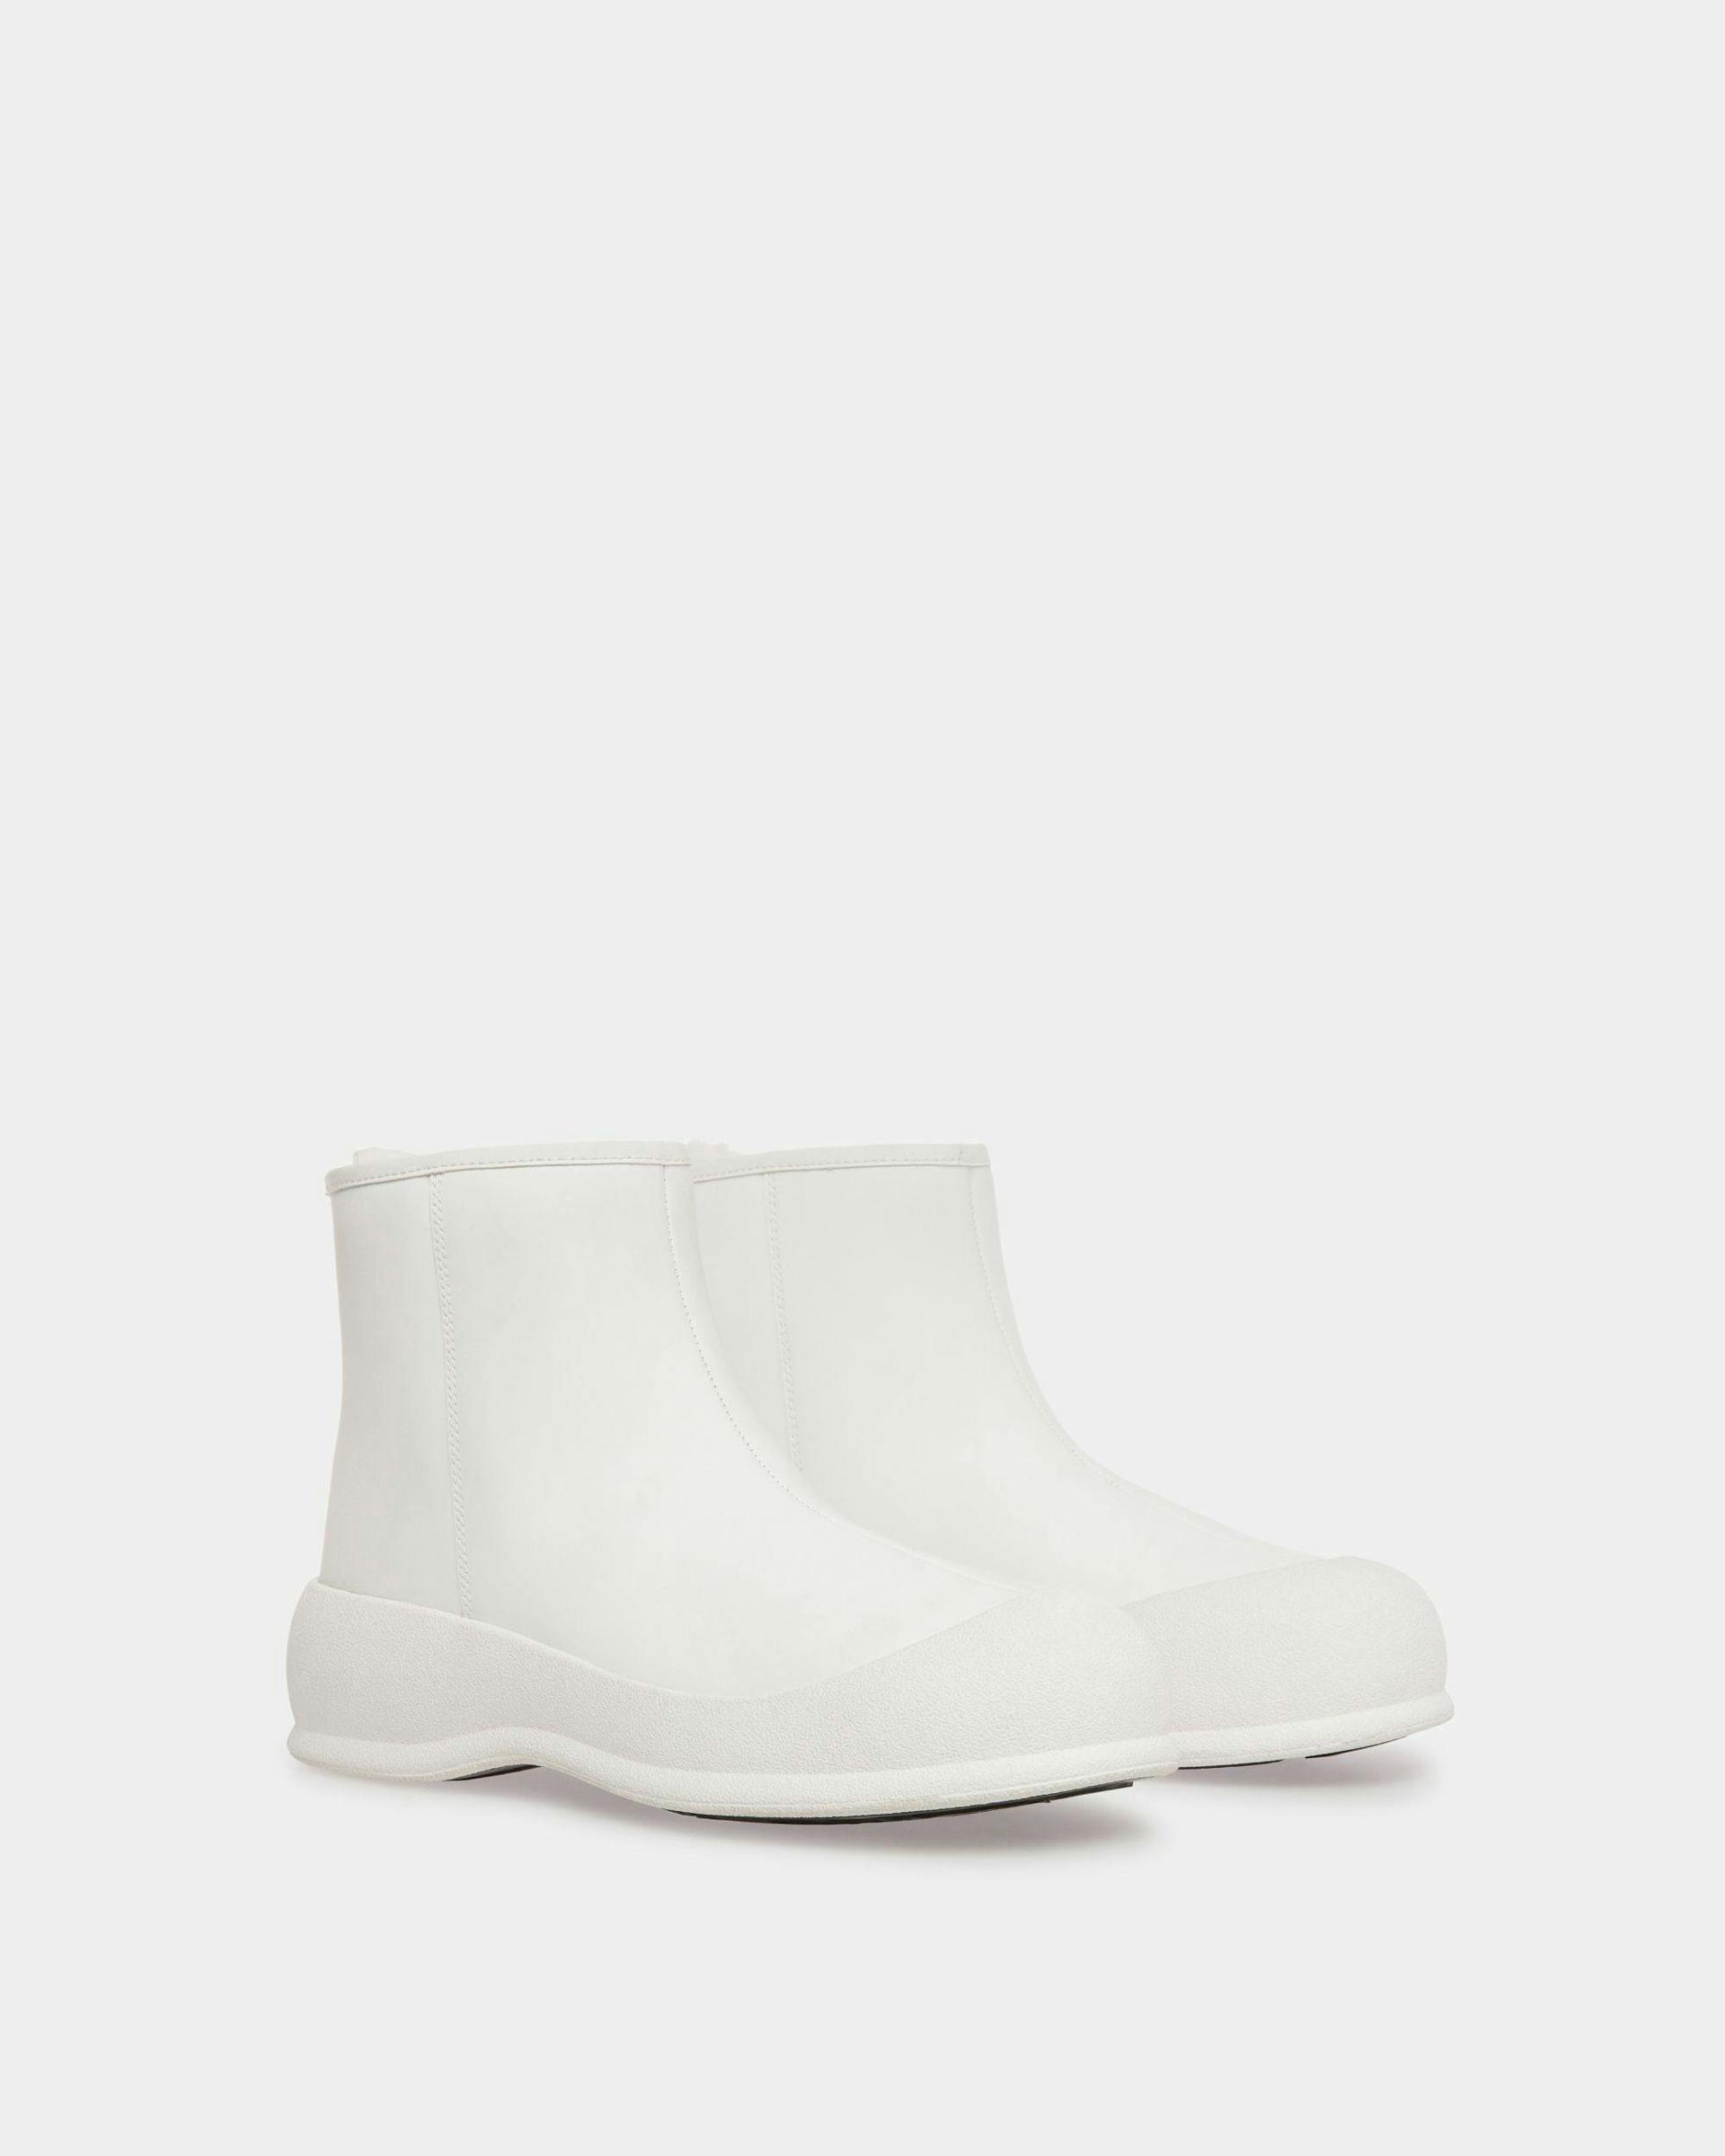 Women's Frei Boots In White Rubber-coated Leather | Bally | Still Life 3/4 Front